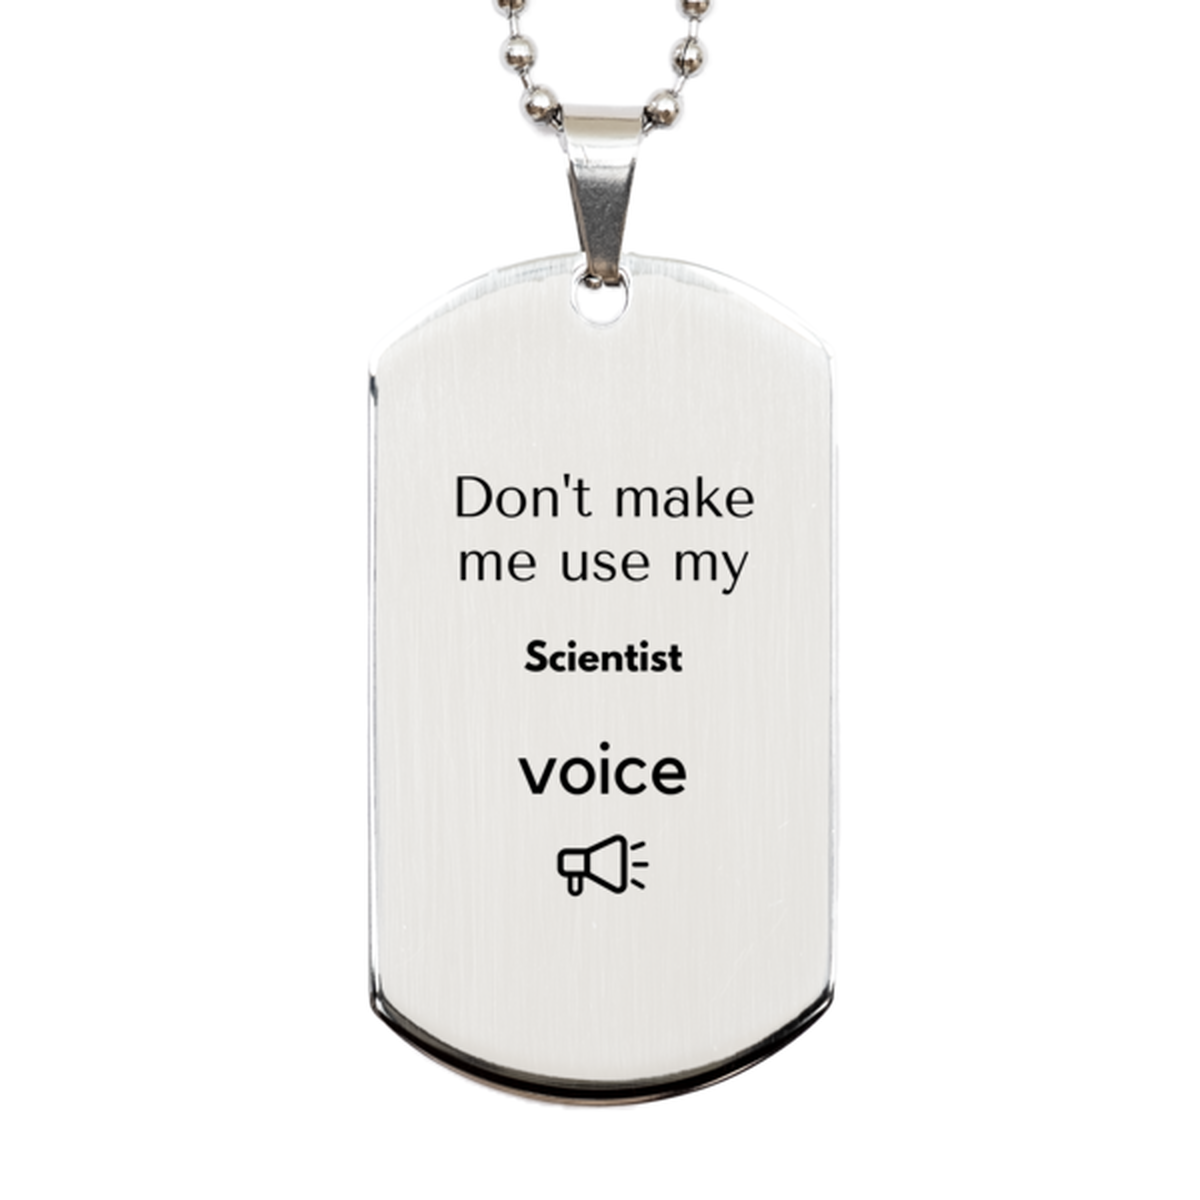 Don't make me use my Scientist voice, Sarcasm Scientist Gifts, Christmas Scientist Silver Dog Tag Birthday Unique Gifts For Scientist Coworkers, Men, Women, Colleague, Friends